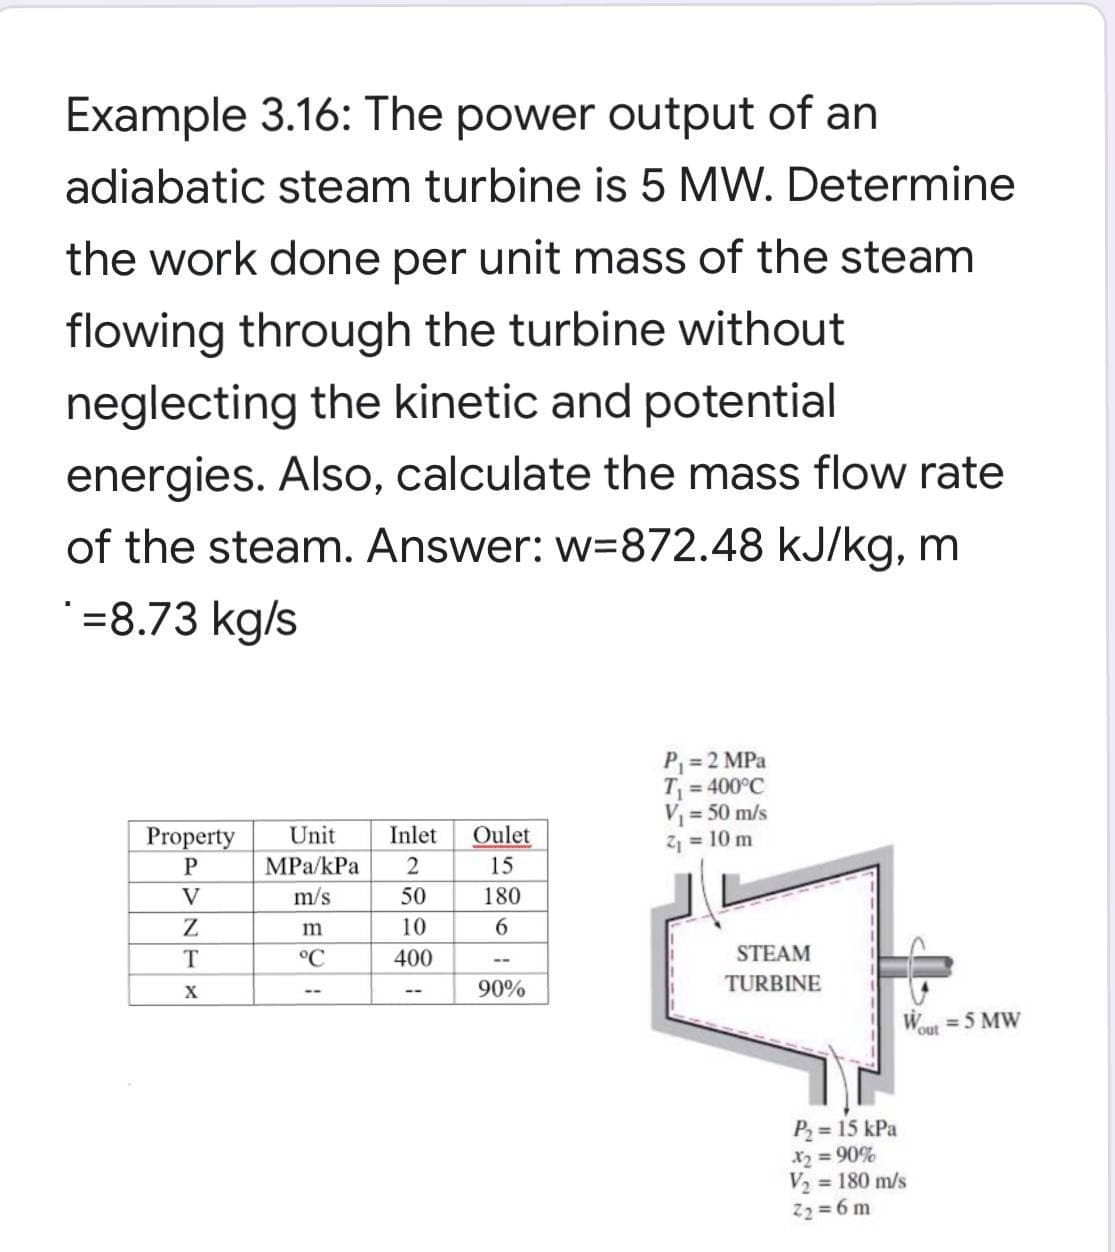 Example 3.16: The power output of an
adiabatic steam turbine is 5 MW. Determine
the work done per unit mass of the steam
flowing through the turbine without
neglecting the kinetic and potential
energies. Also, calculate the mass flow rate
of the steam. Answer: w=872.48 kJ/kg, m
'=8.73 kg/s
P= 2 MPa
T = 400°C
V = 50 m/s
Z1 = 10 m
Property
Unit
Inlet
Oulet
MPa/kPa
15
V
m/s
50
180
10
6
°C
400
STEAM
90%
TURBINE
X
W = 5 MW
P2 = 15 kPa
X2 90%
V2 = 180 m/s
22 = 6 m
